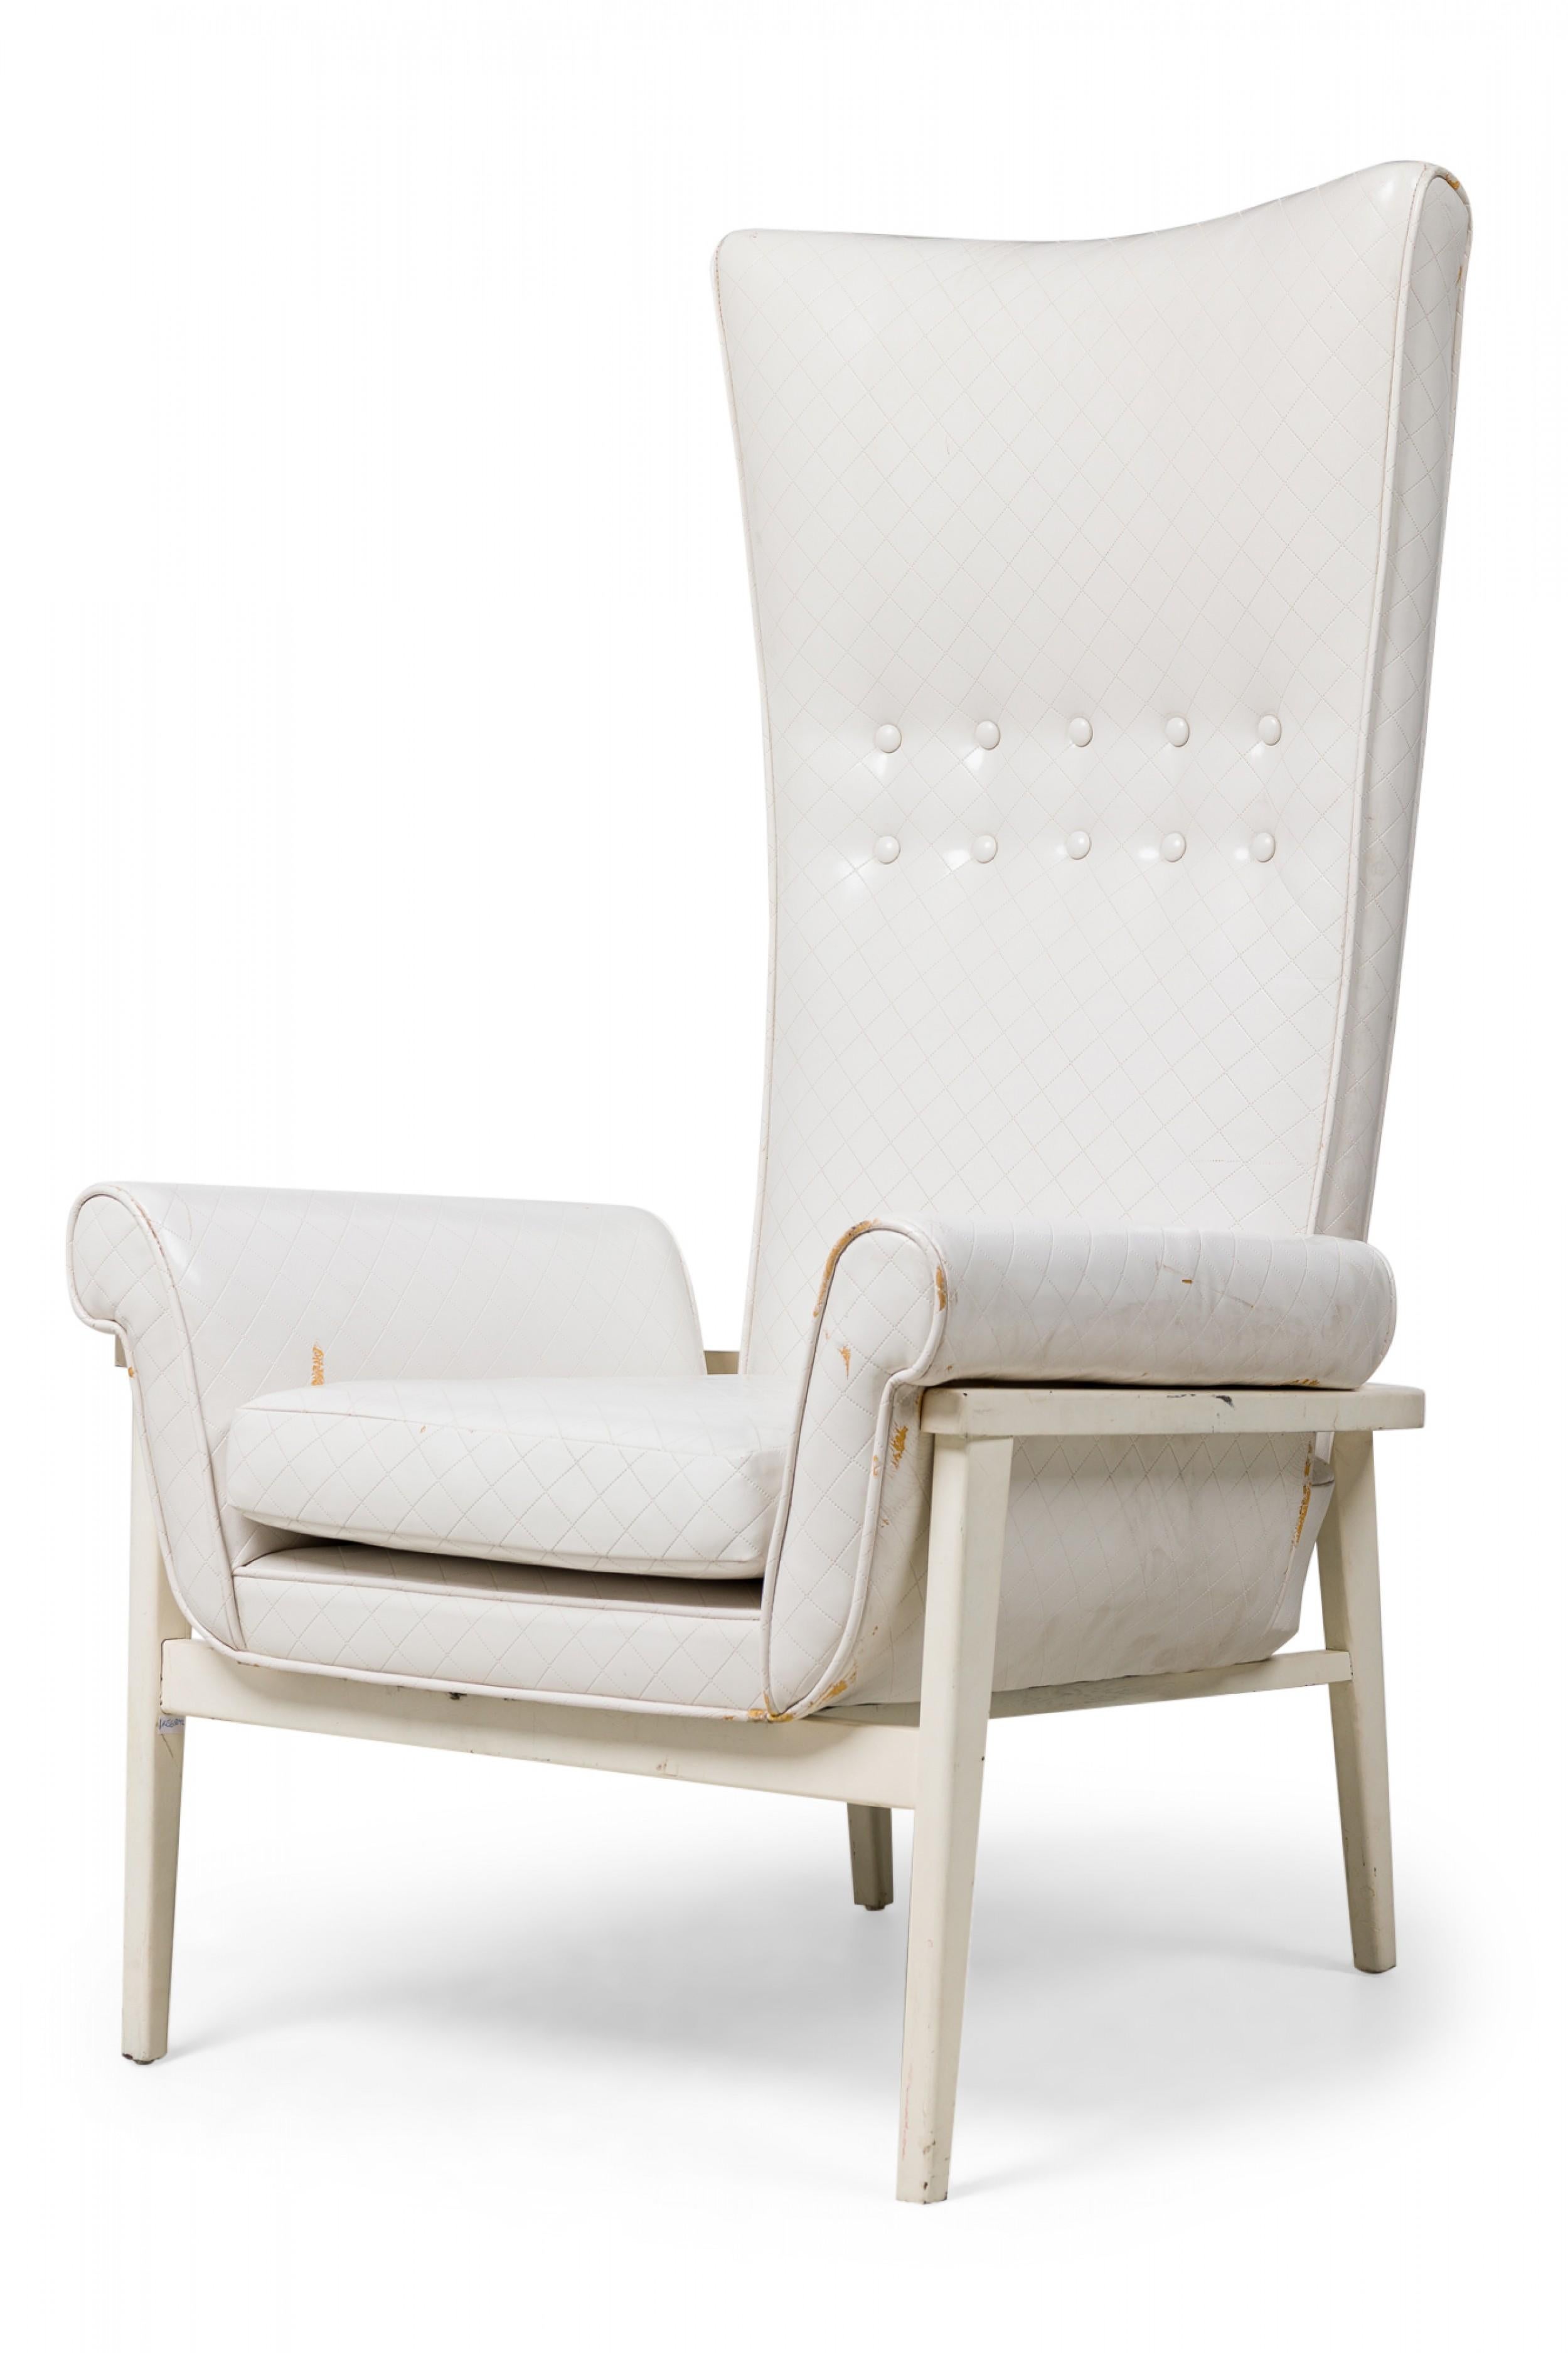 Mid-Century American (1950) lounge / armchair with a high, tapered, button tufted back, curved frame, rolled arms, upholstered in faux white leather embossed with a diamond pattern, standing on 4 tapered square form legs which are slightly splayed.